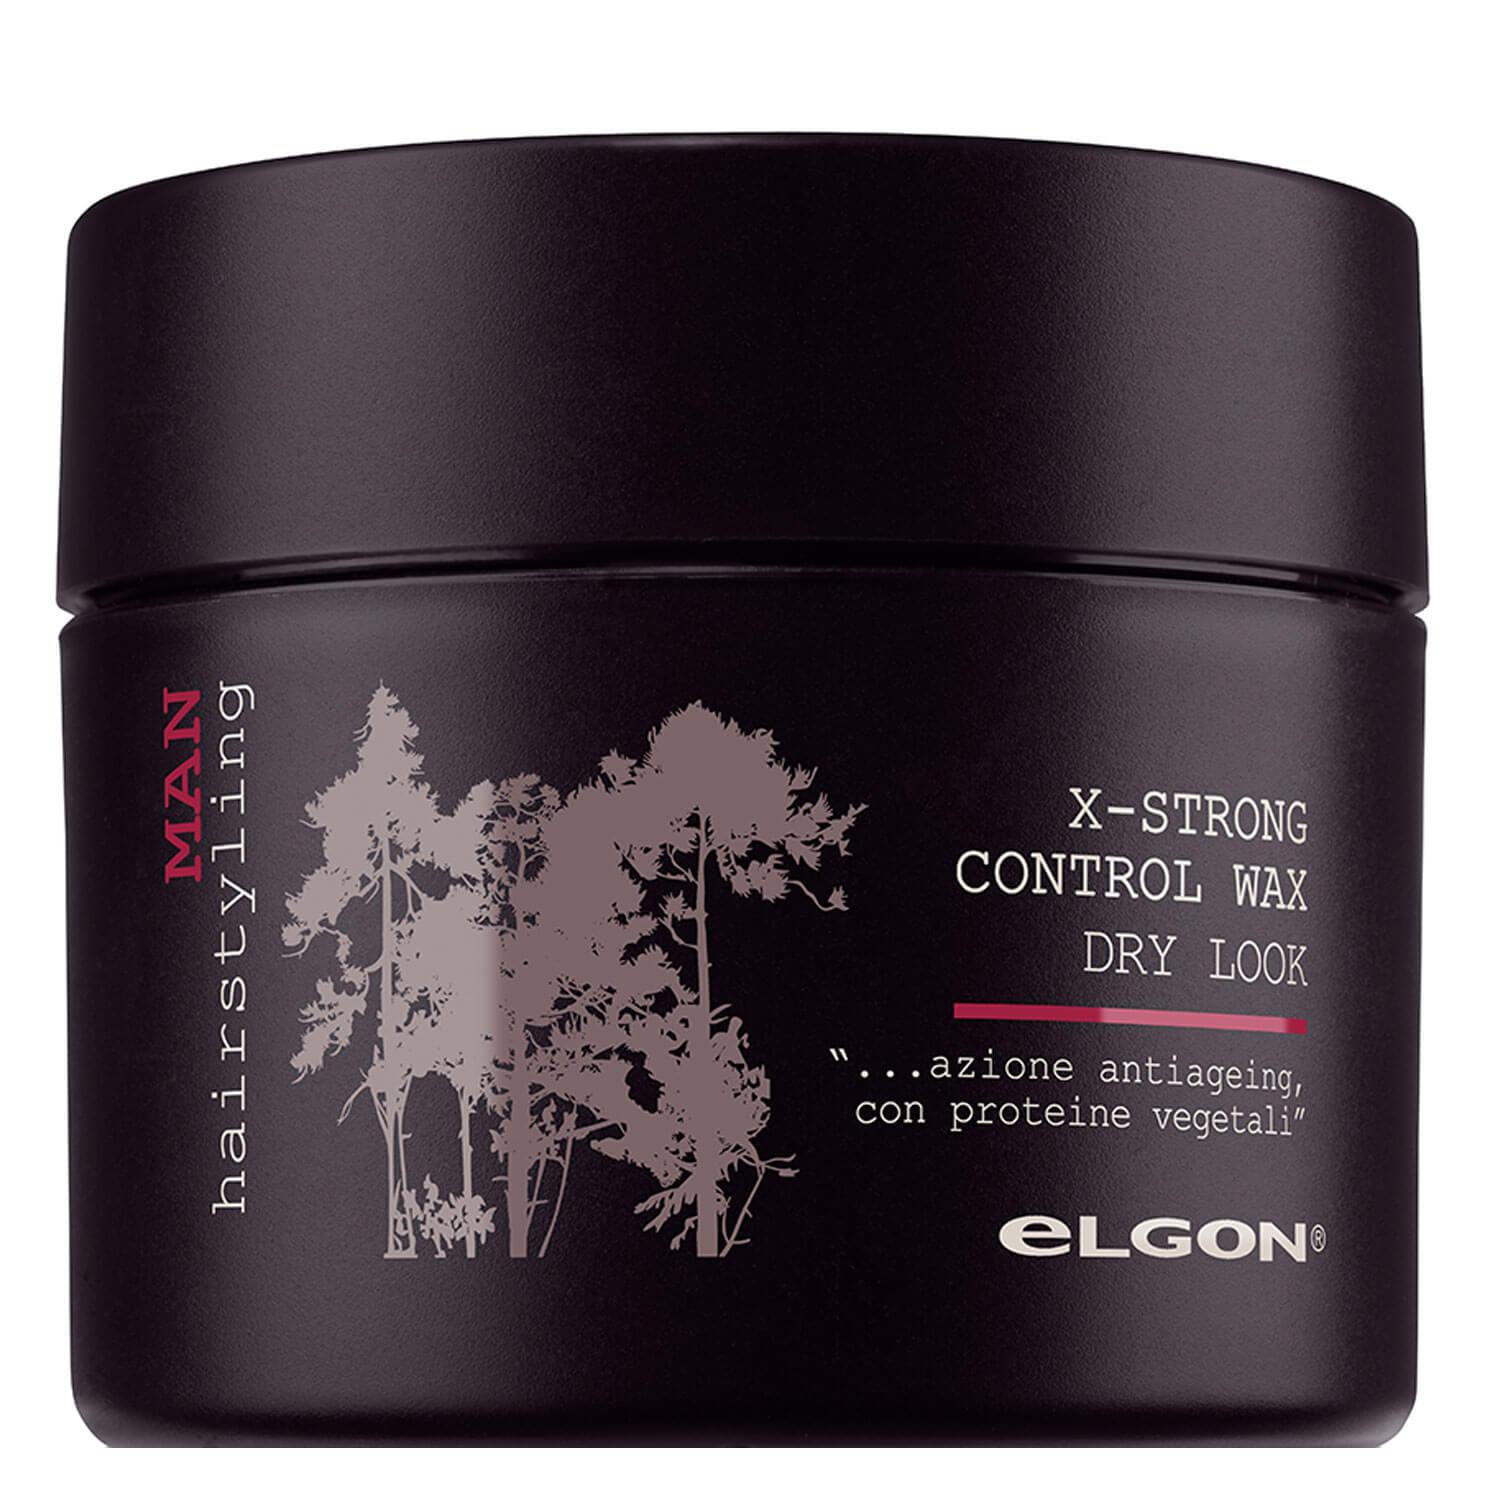 Elgon for Men - X-Strong Control Wax